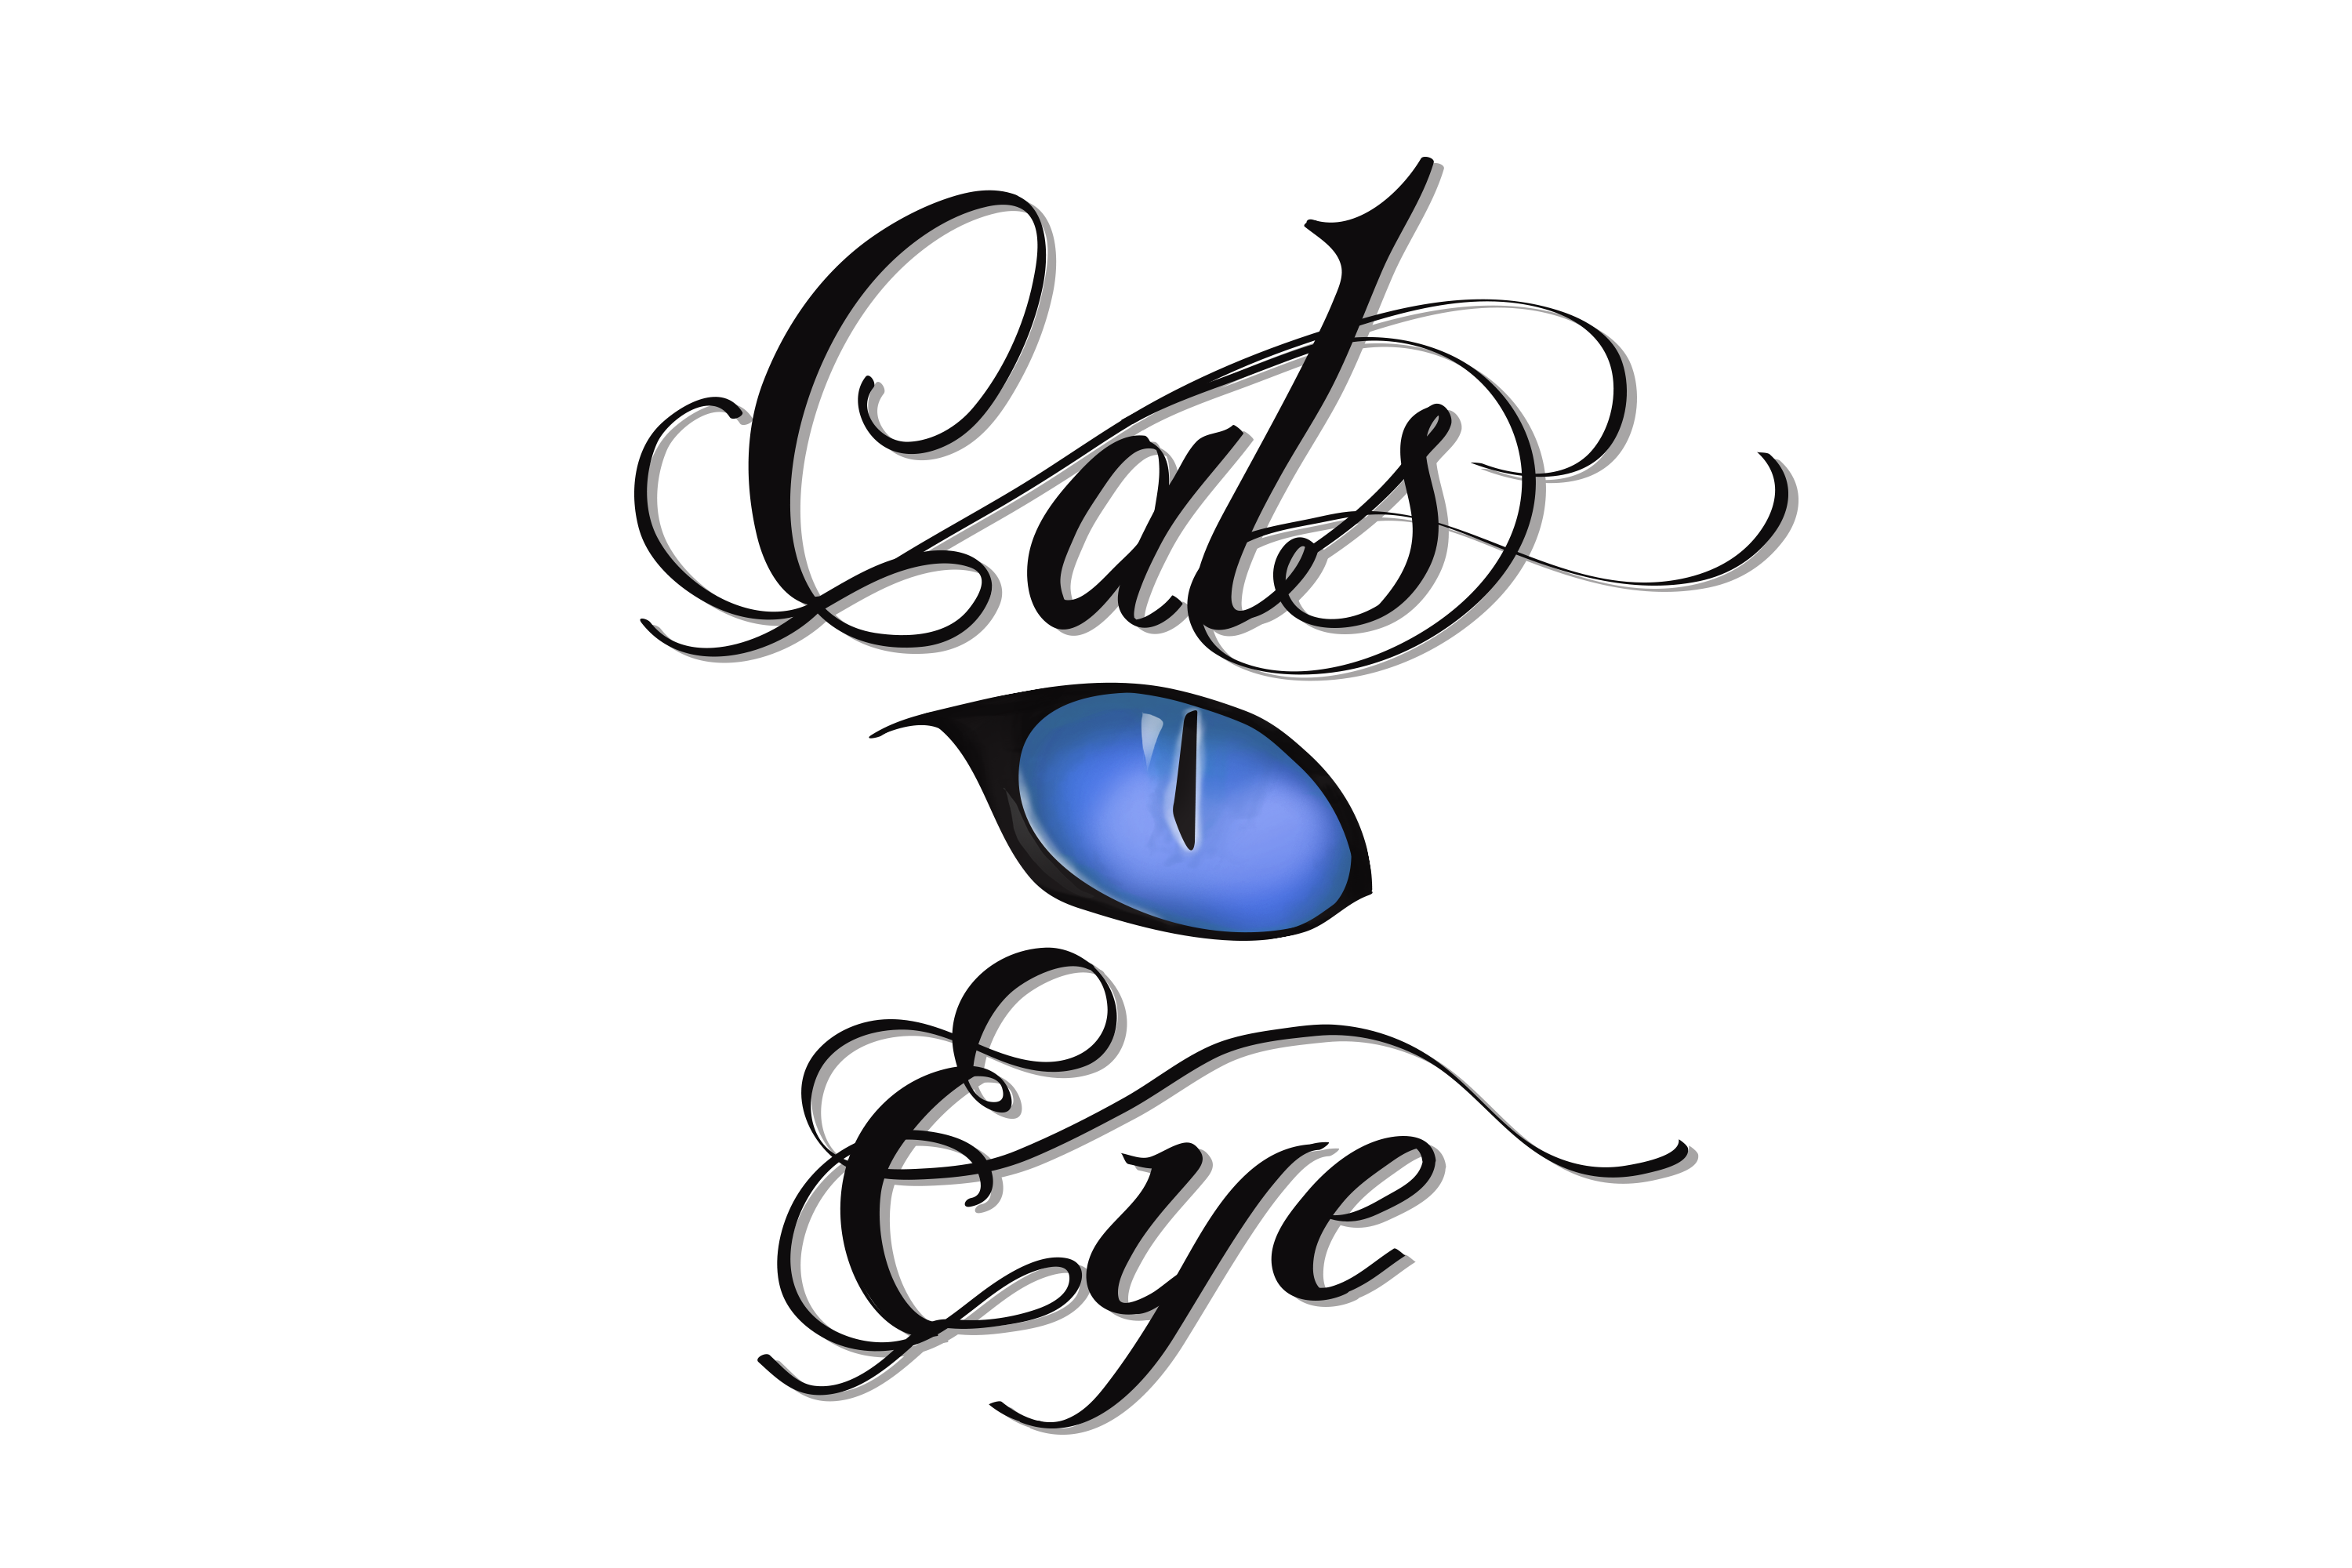 The Cats Eye allows the customer to see the entire tattoo process!